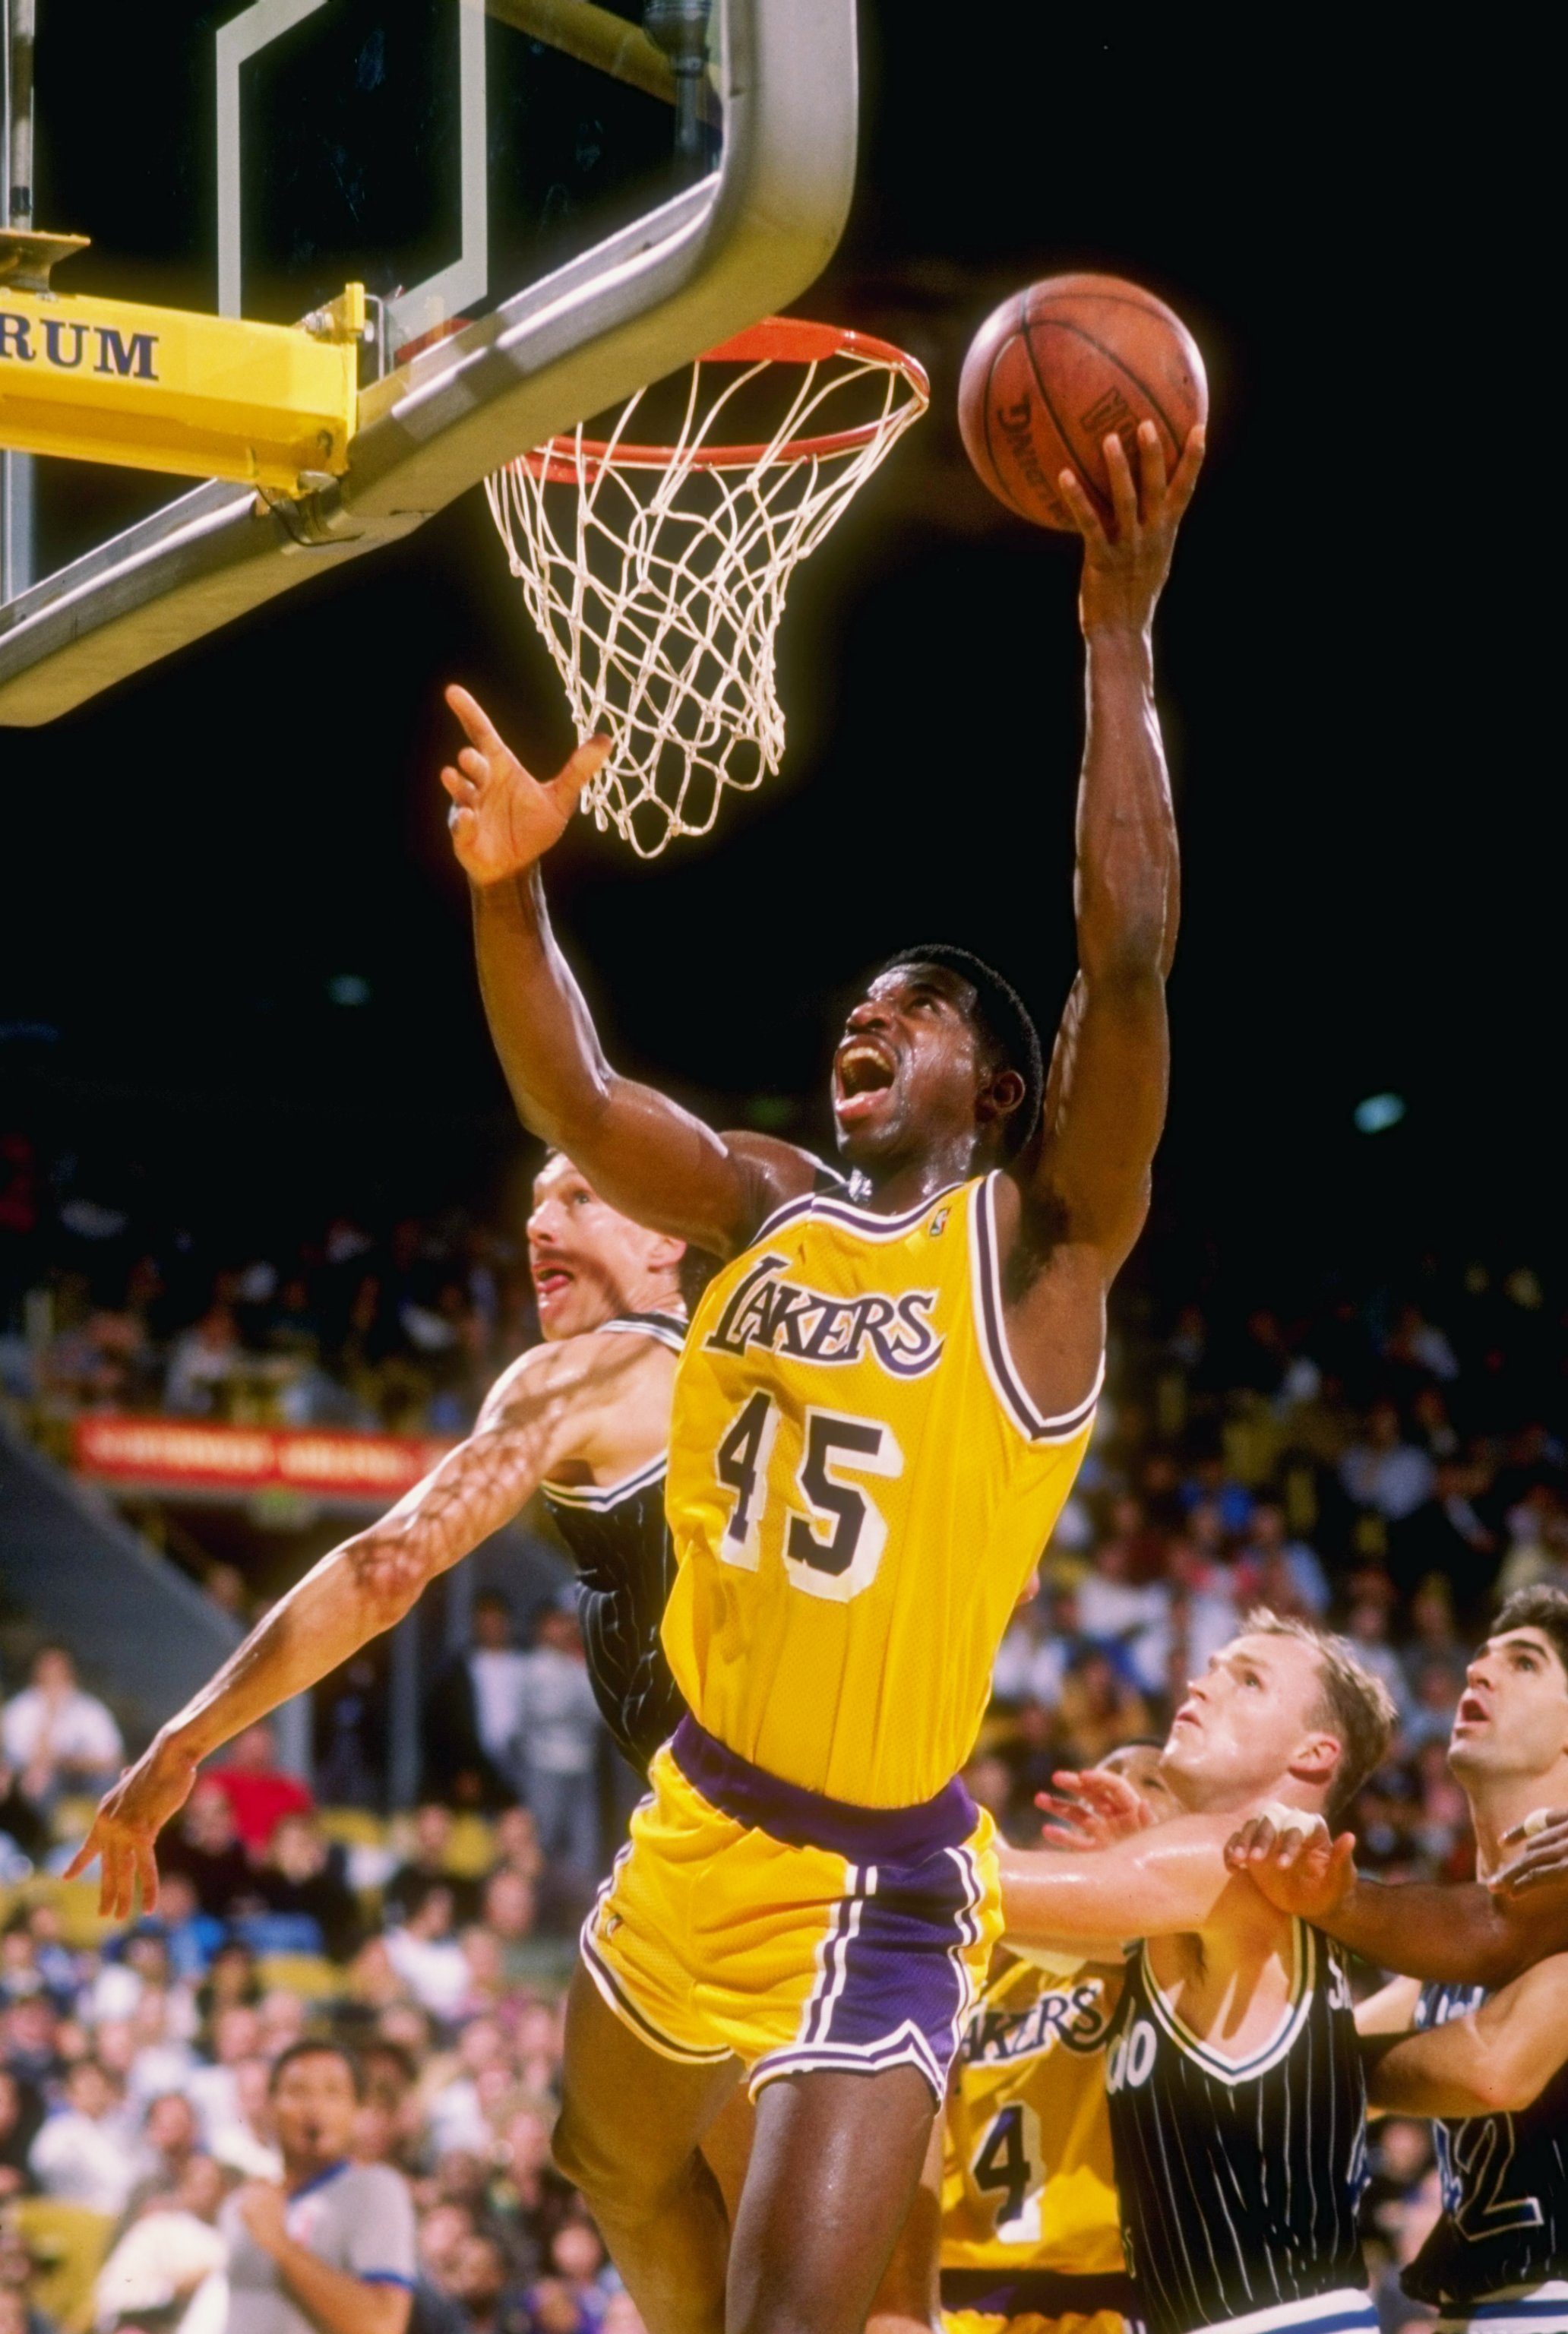 Highest paid players in Los Angeles Lakers history